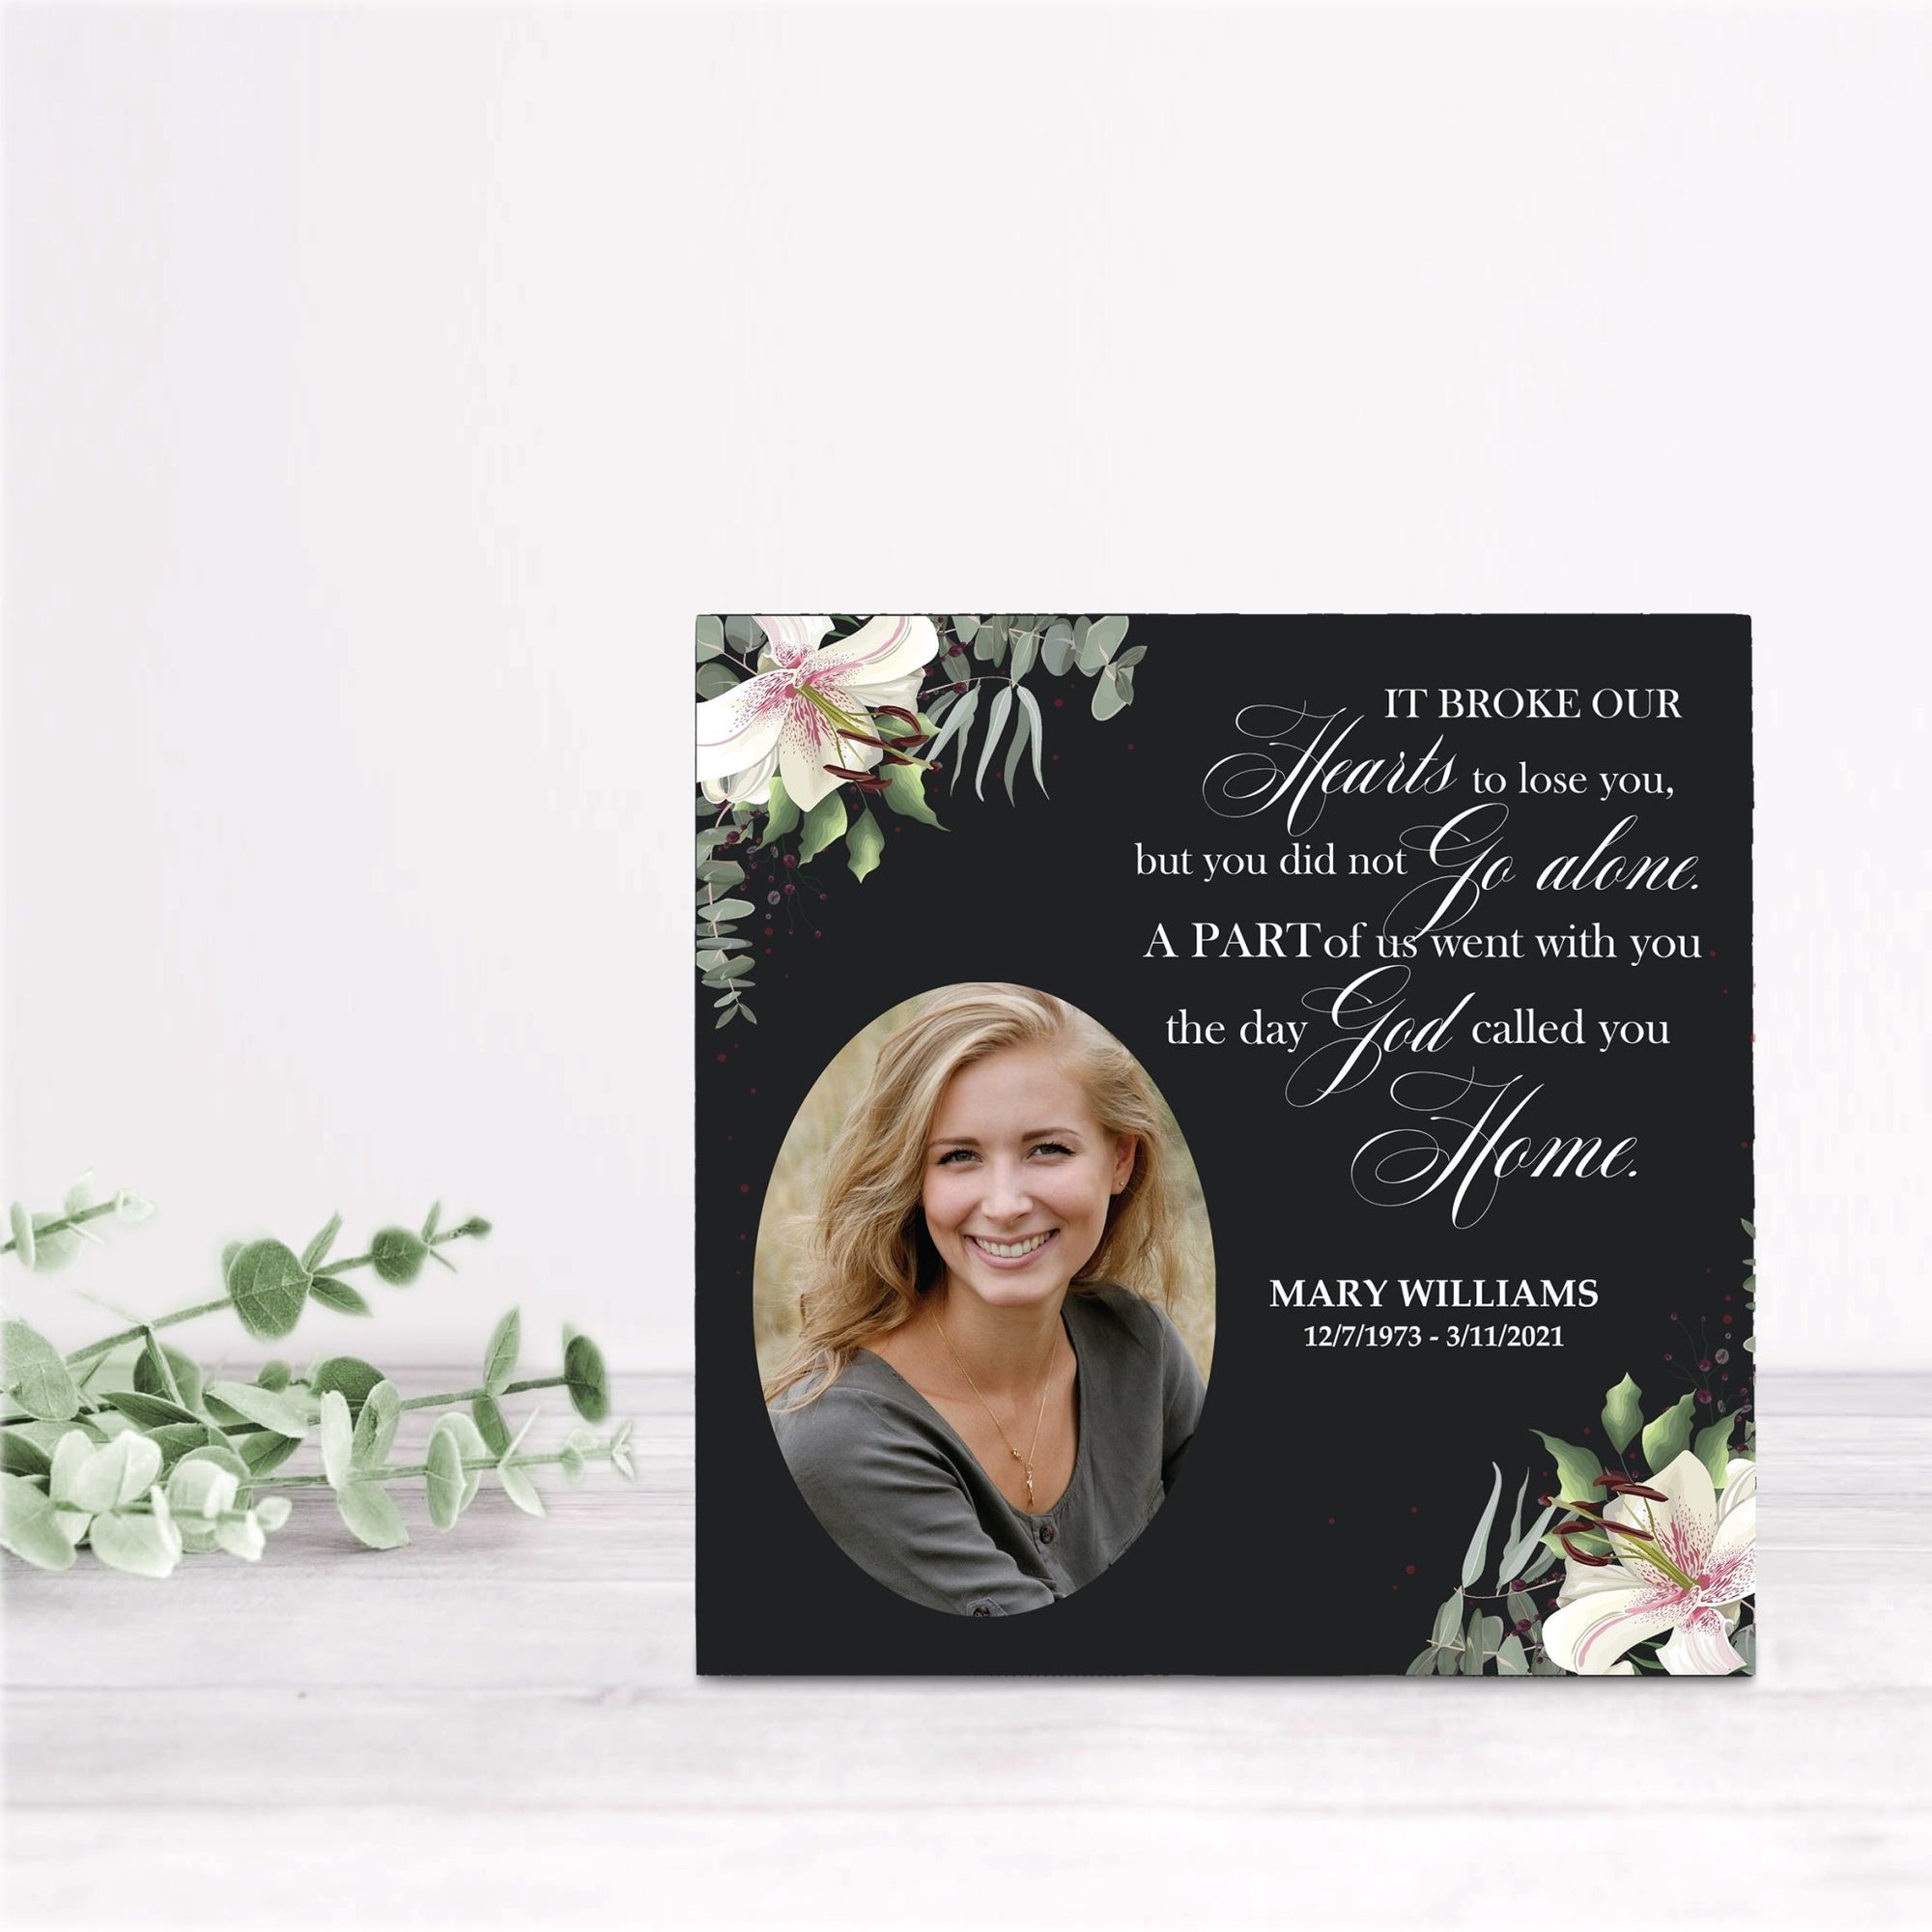 Timeless Human Memorial Shadow Box Photo Urn in Black - It Broke Our Hearts - LifeSong Milestones